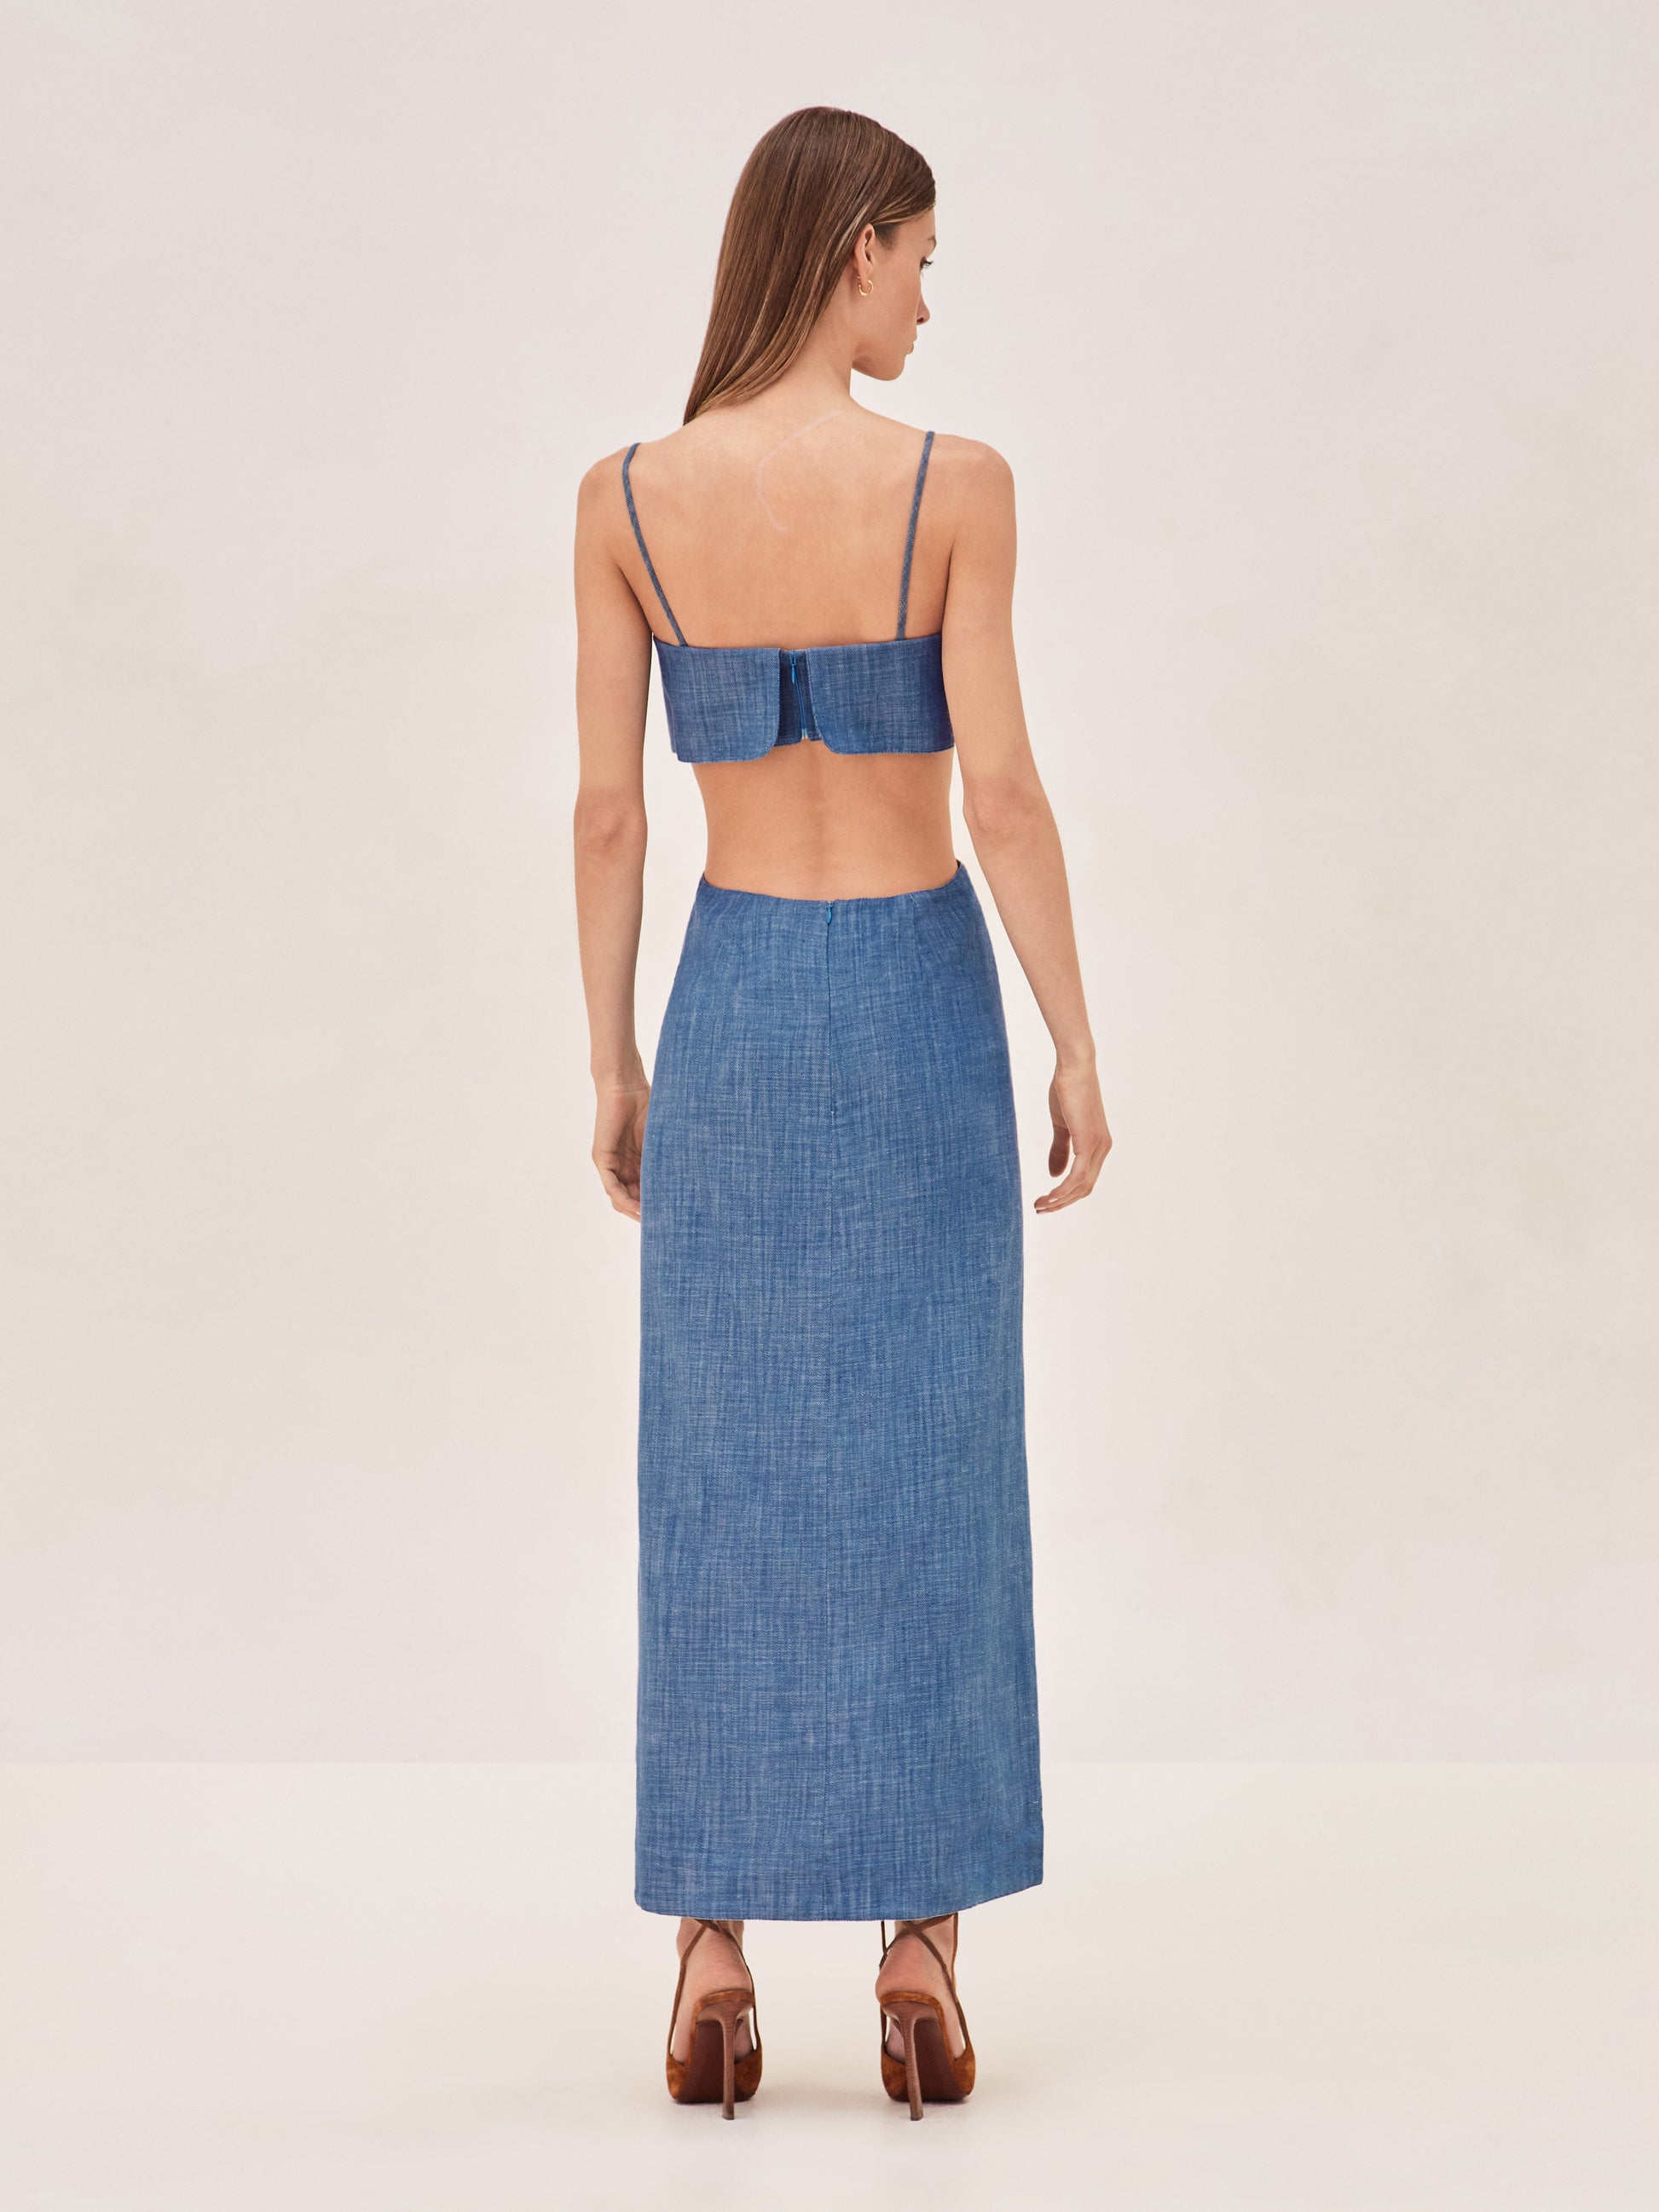 ALEXIS Denim sleevless maxi dress with side cut outs and slits up the front.